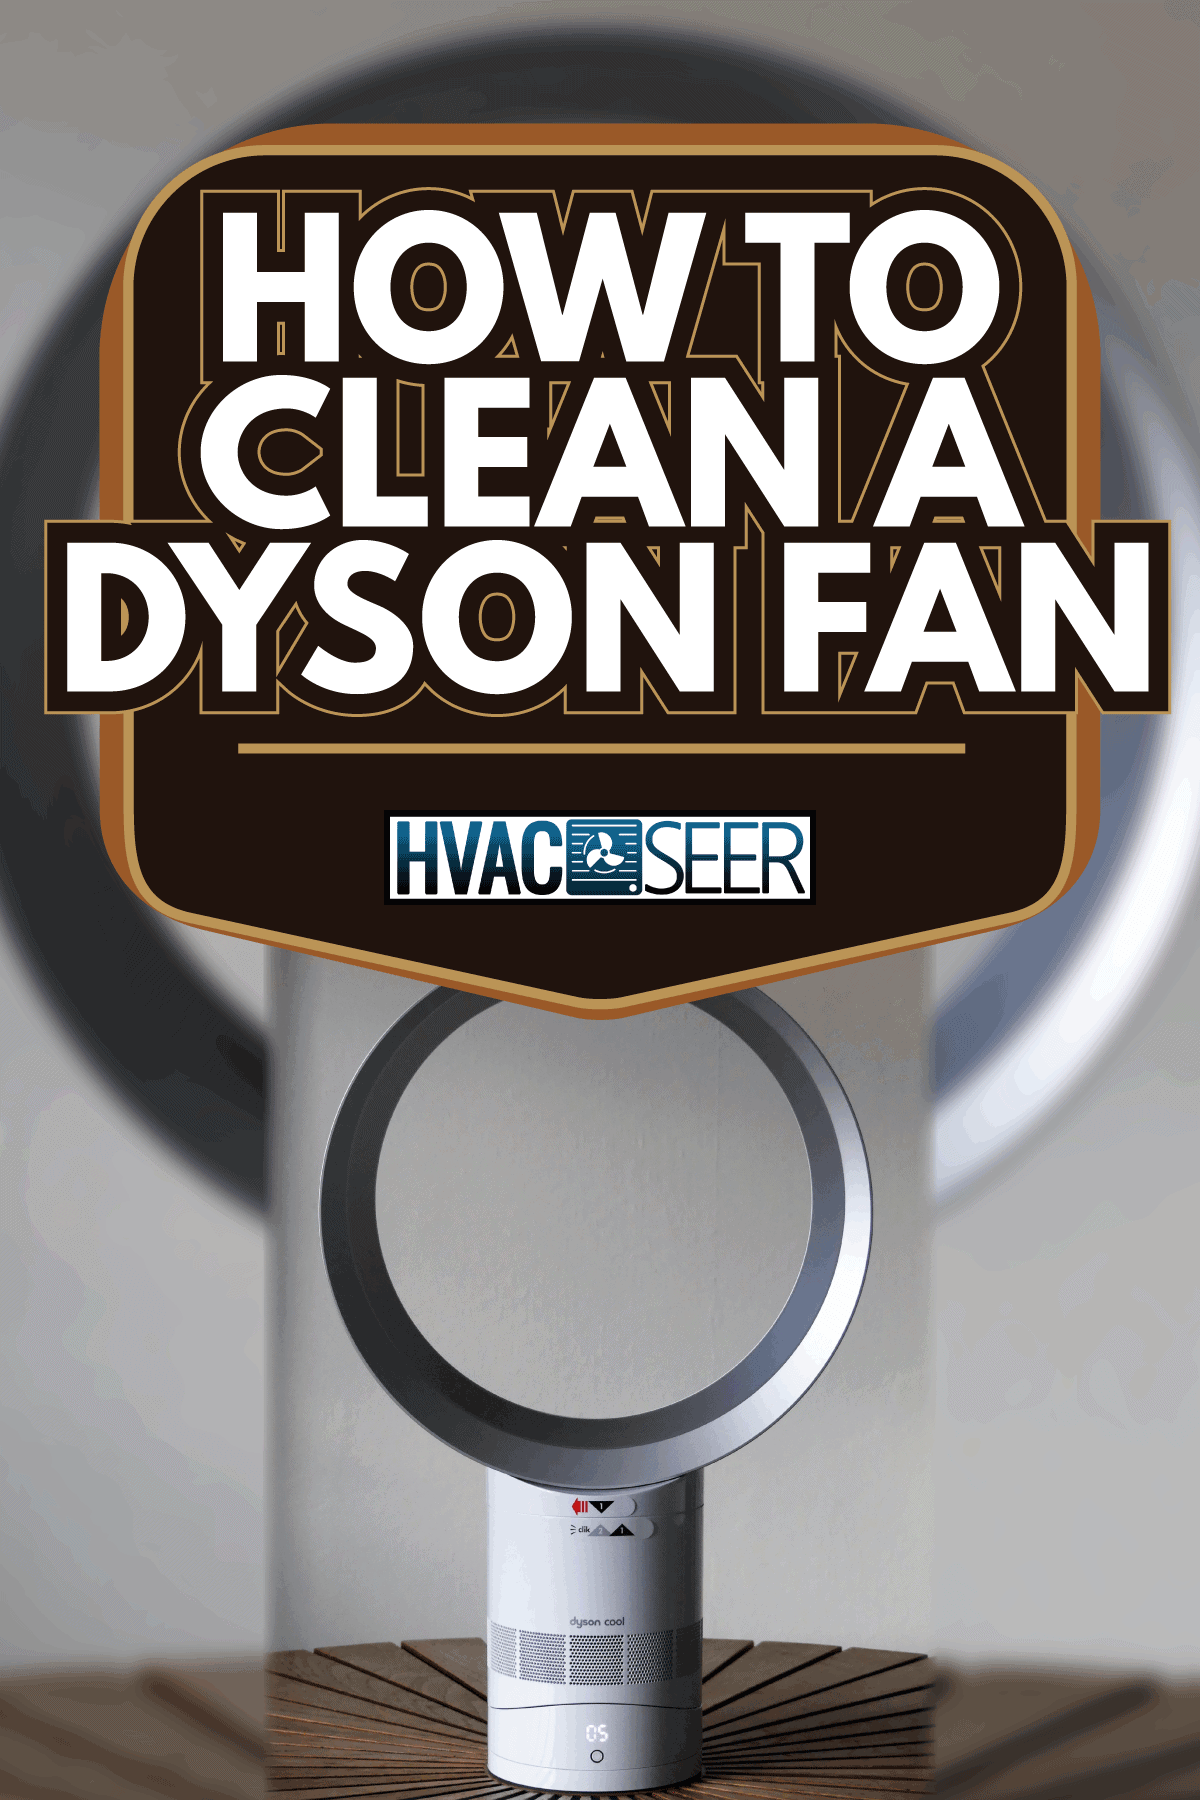 Dyson Cool white desk fan placed on circular wooden table. How To Clean A Dyson Fan